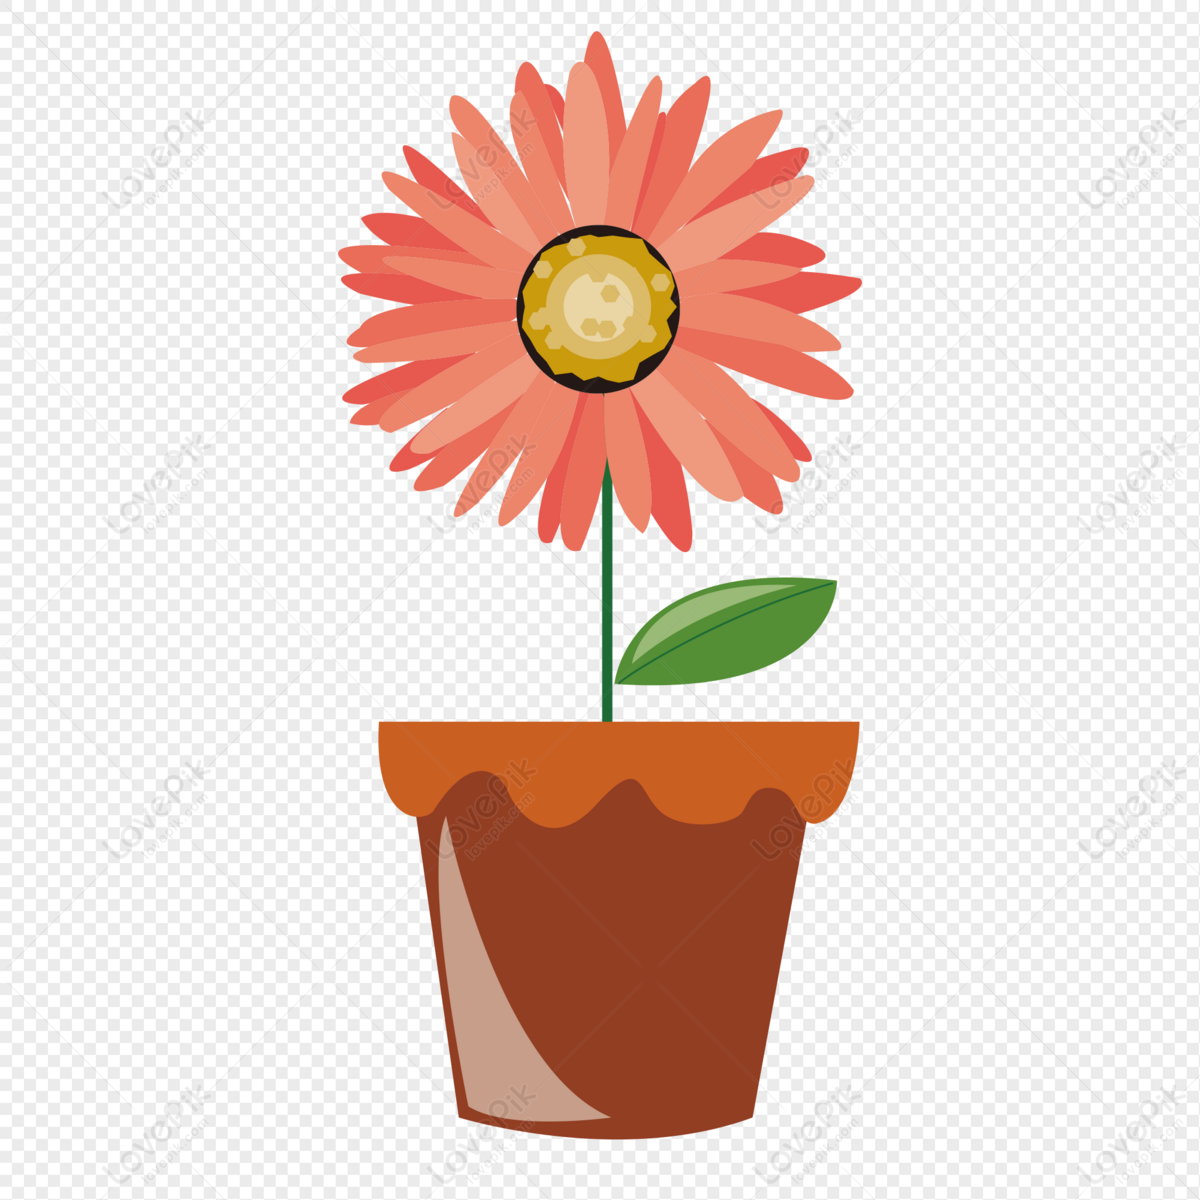 Flower Pot PNG Free Download And Clipart Image For Free Download - Lovepik  | 401147393